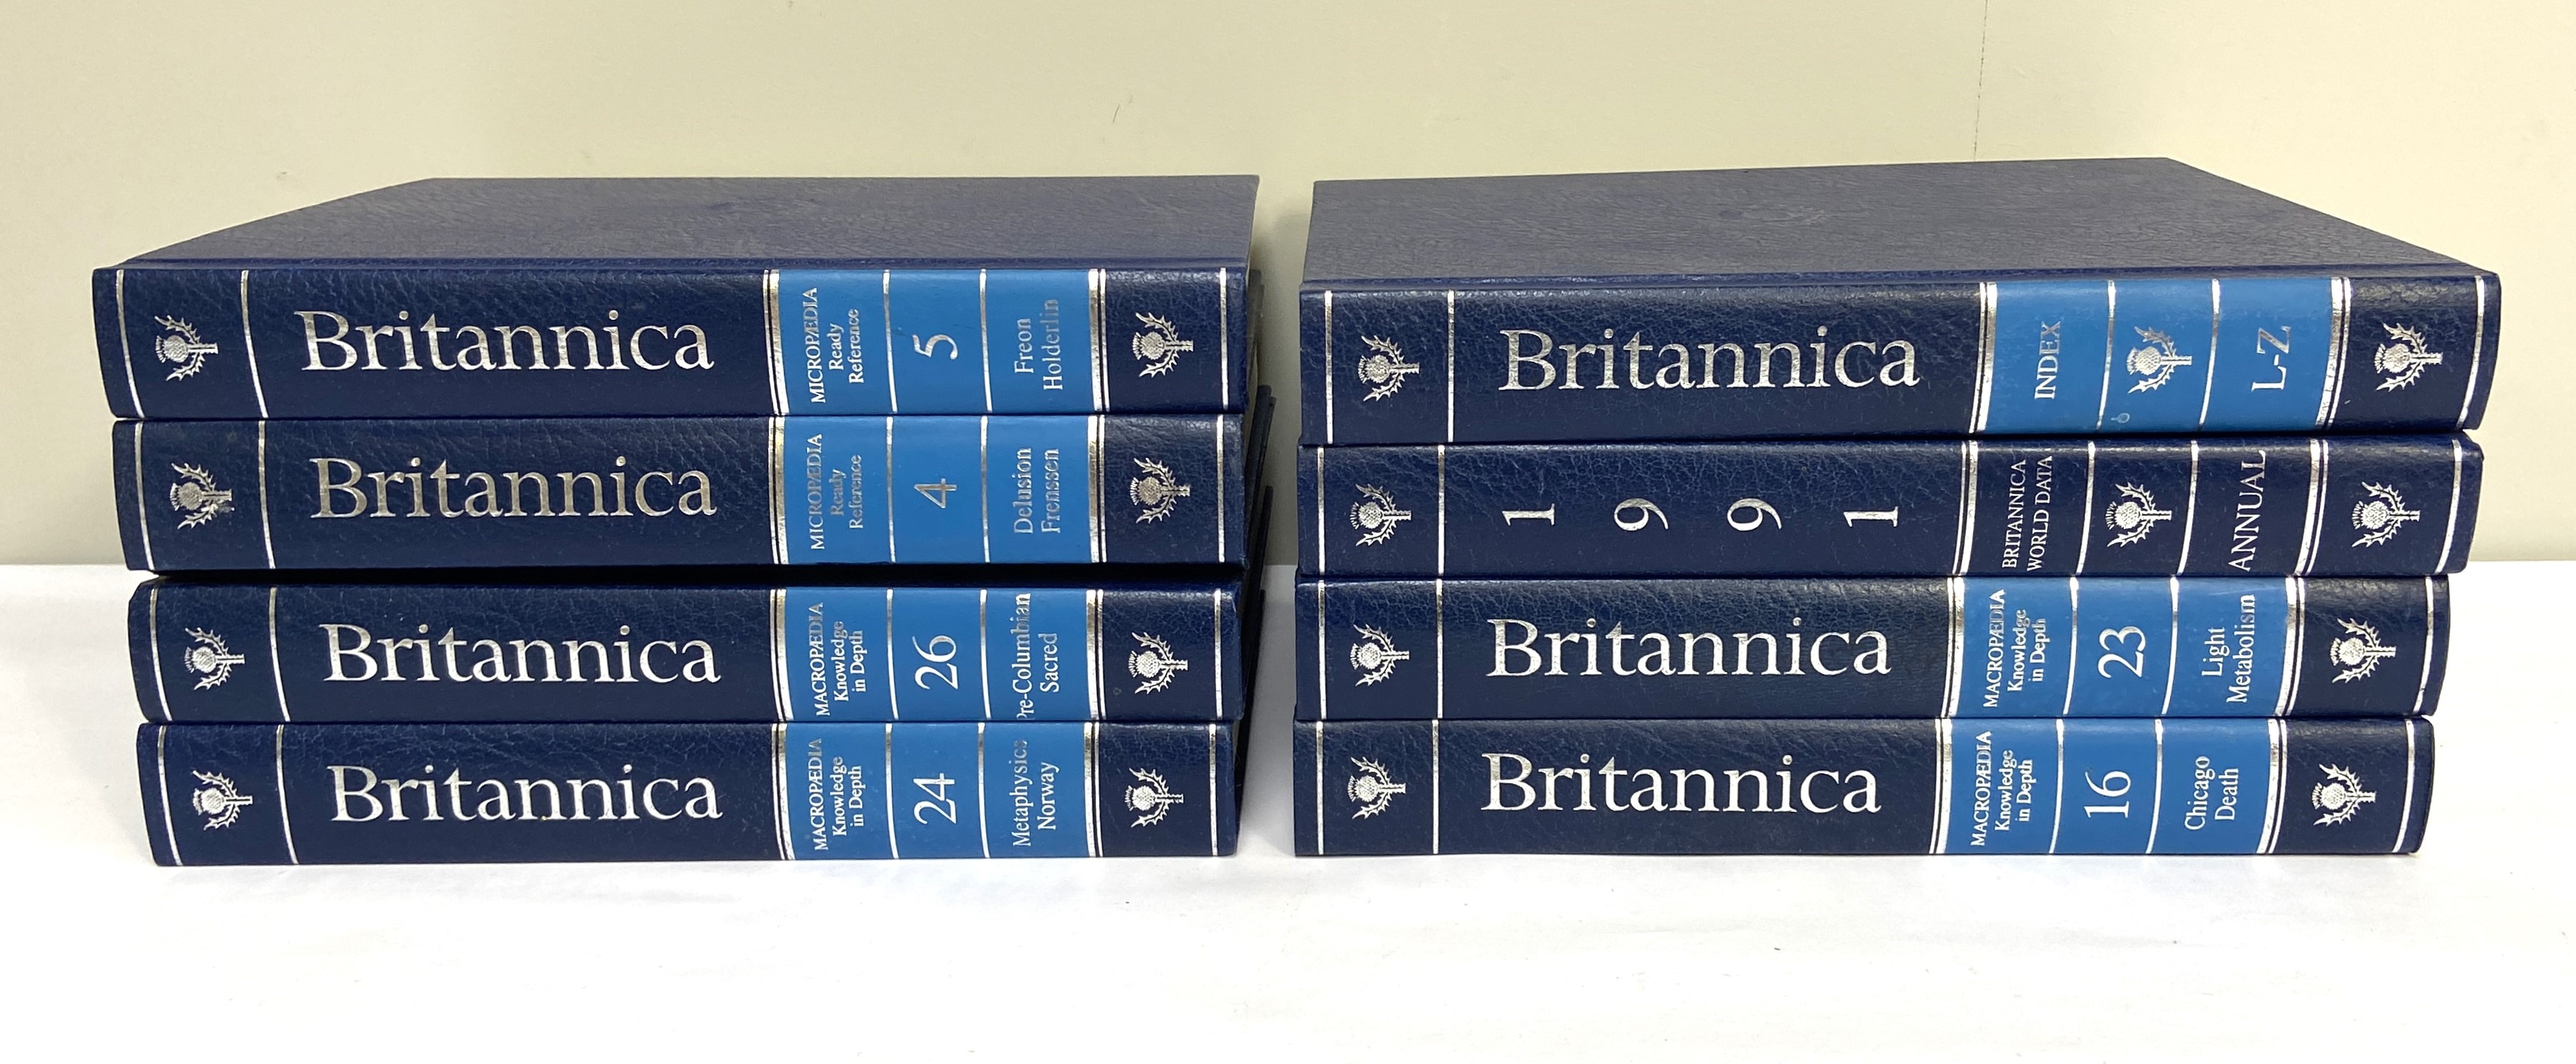 Encyclopedia Britannica, The New 15th Edition, in blue, 35 volumes, generally good overall - Image 2 of 13